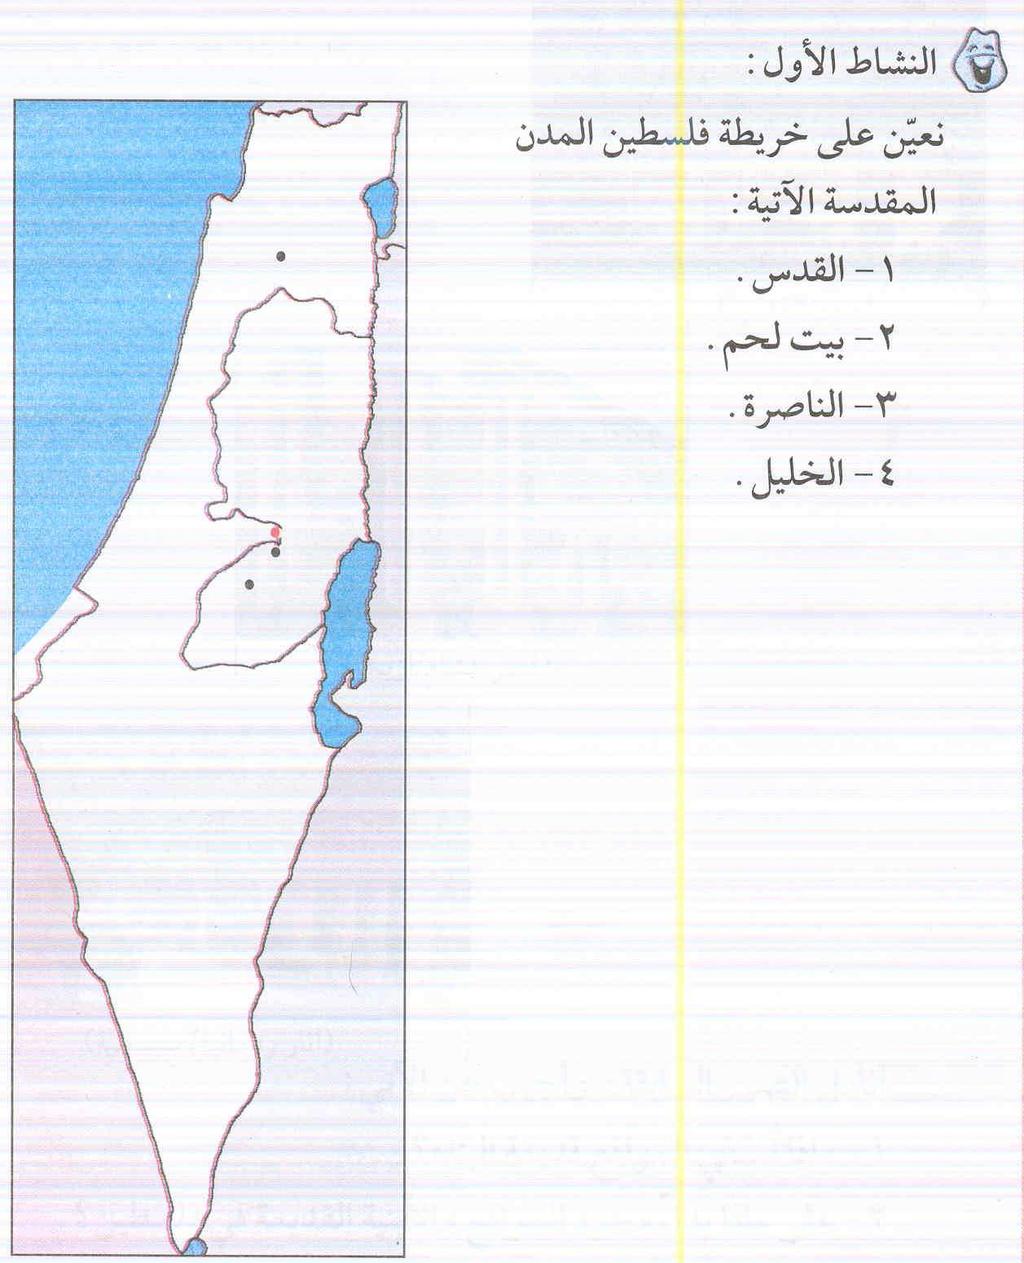 The most famous [city] ports of the Arab homeland Haifa and Gaza in Palestine Geography of the Arab Homeland, Grade 9 (2003) p.